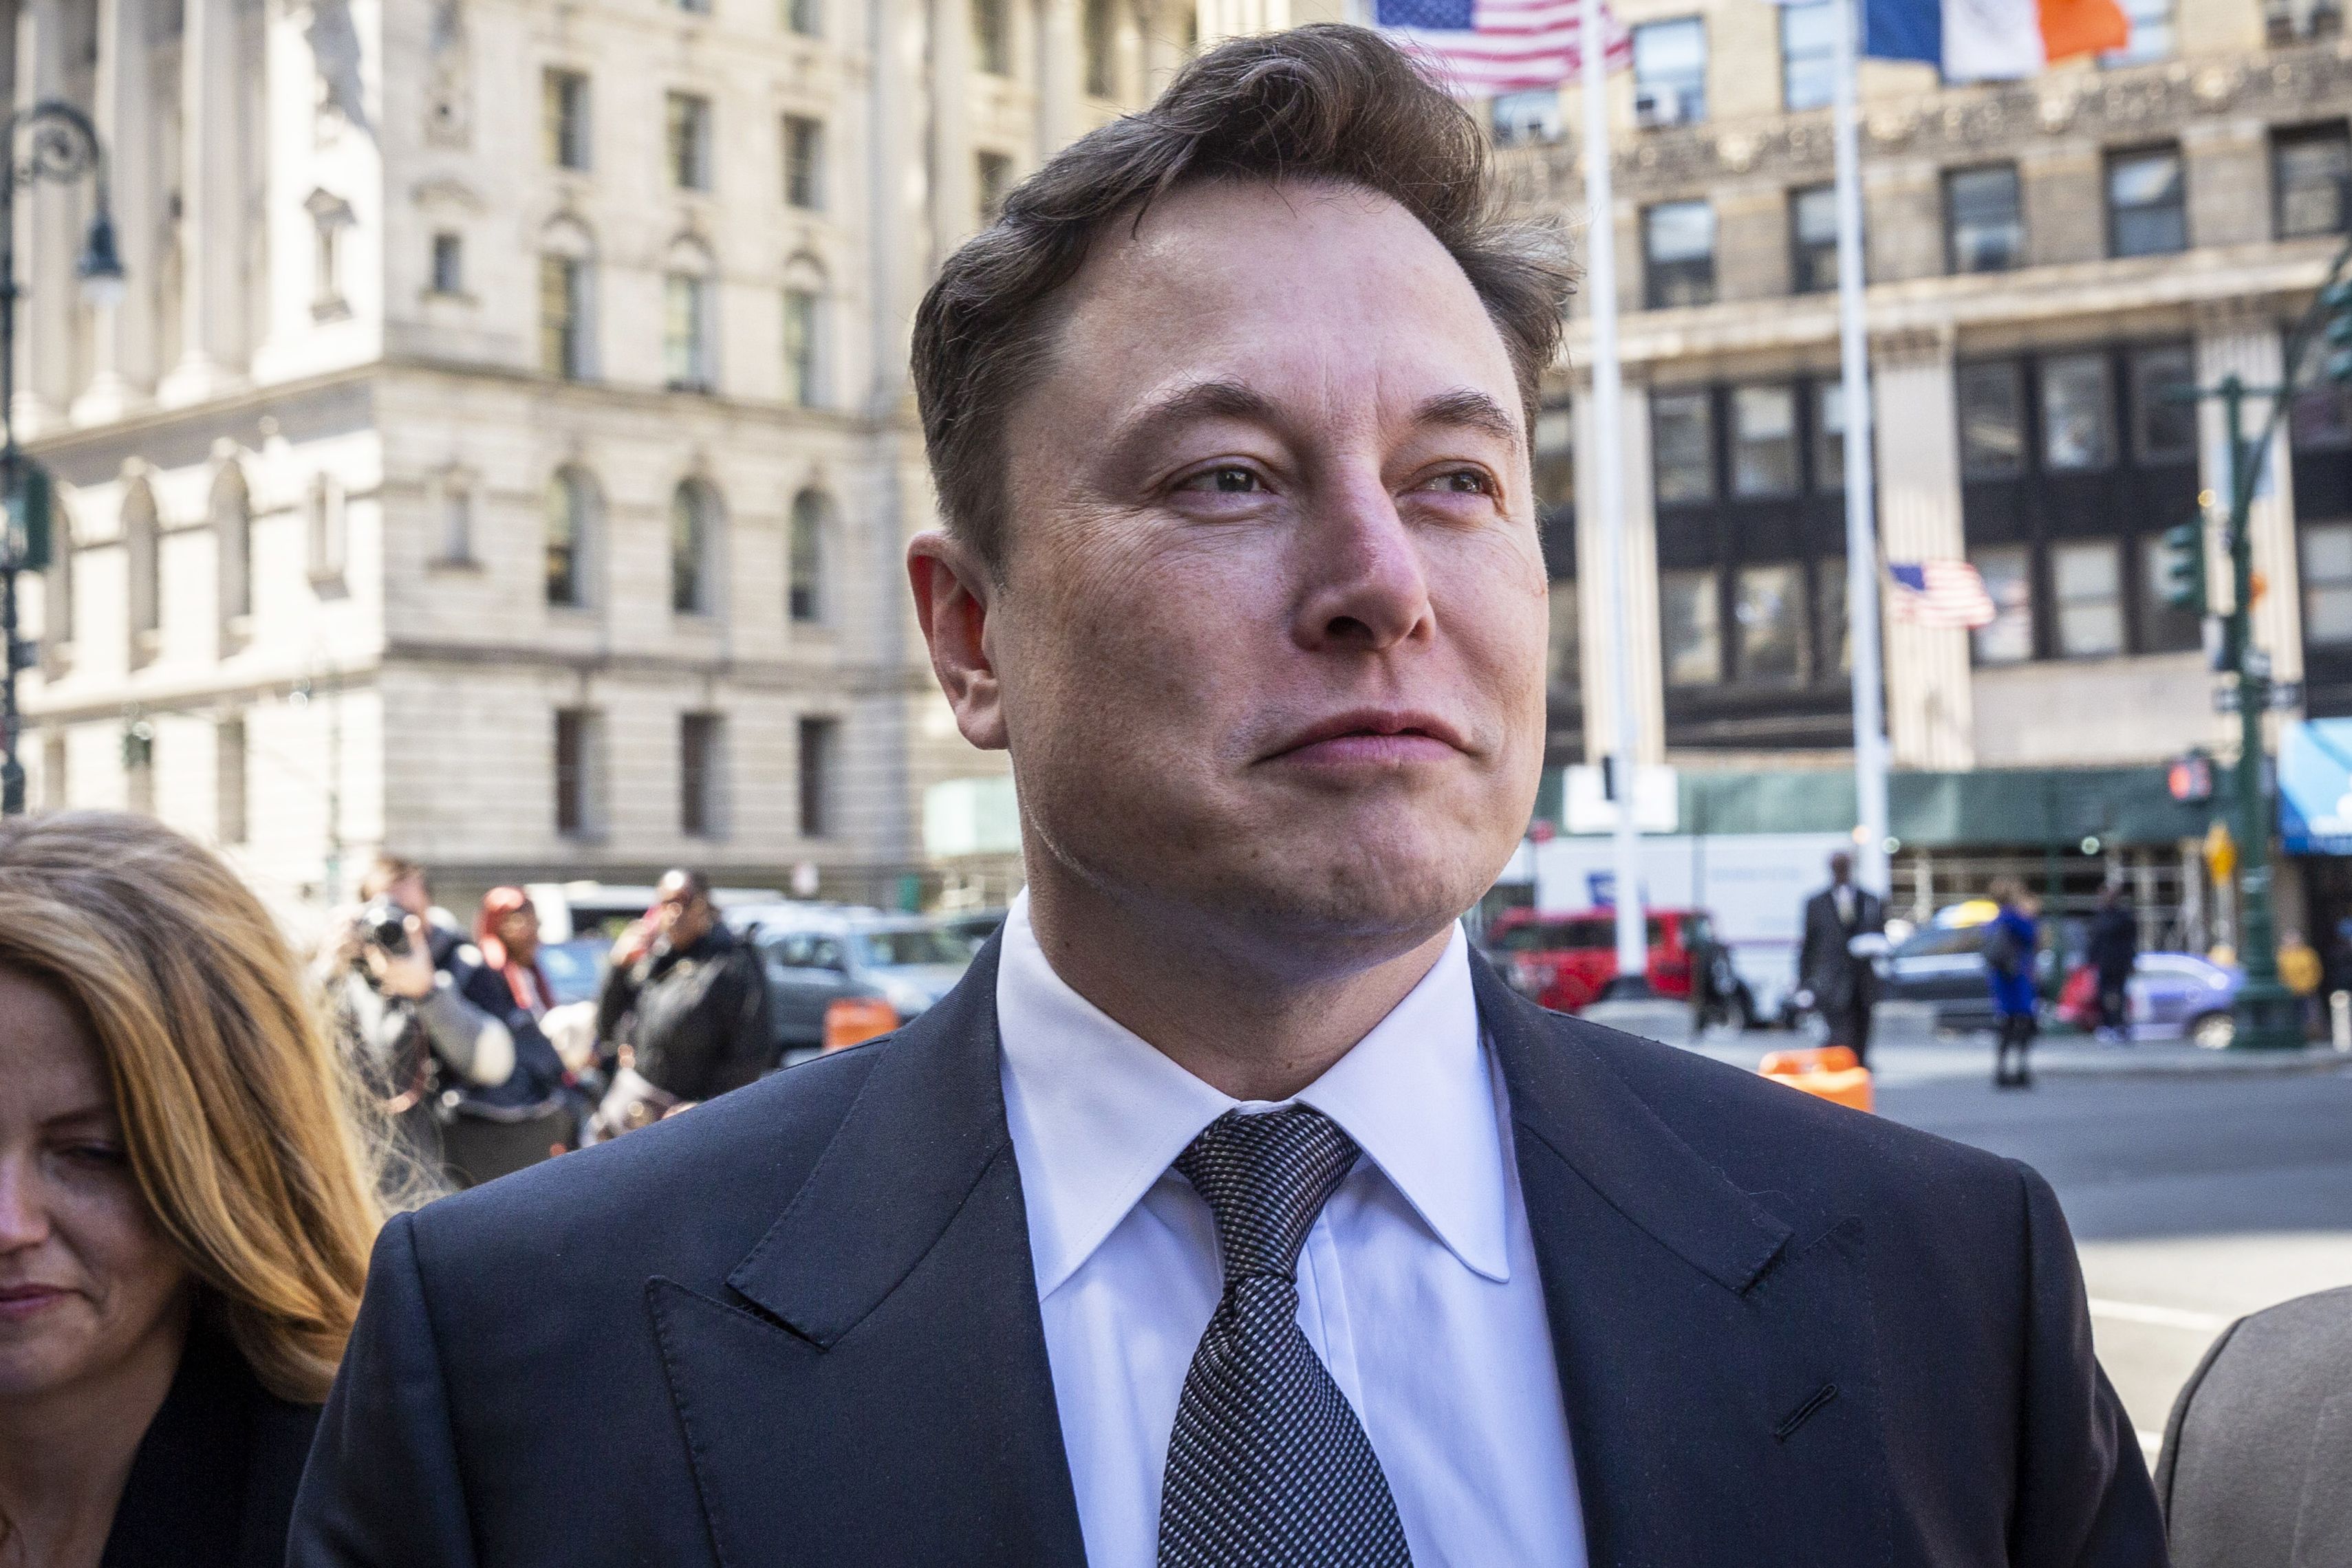 Elon Musk says he 'deleted' his Twitter account